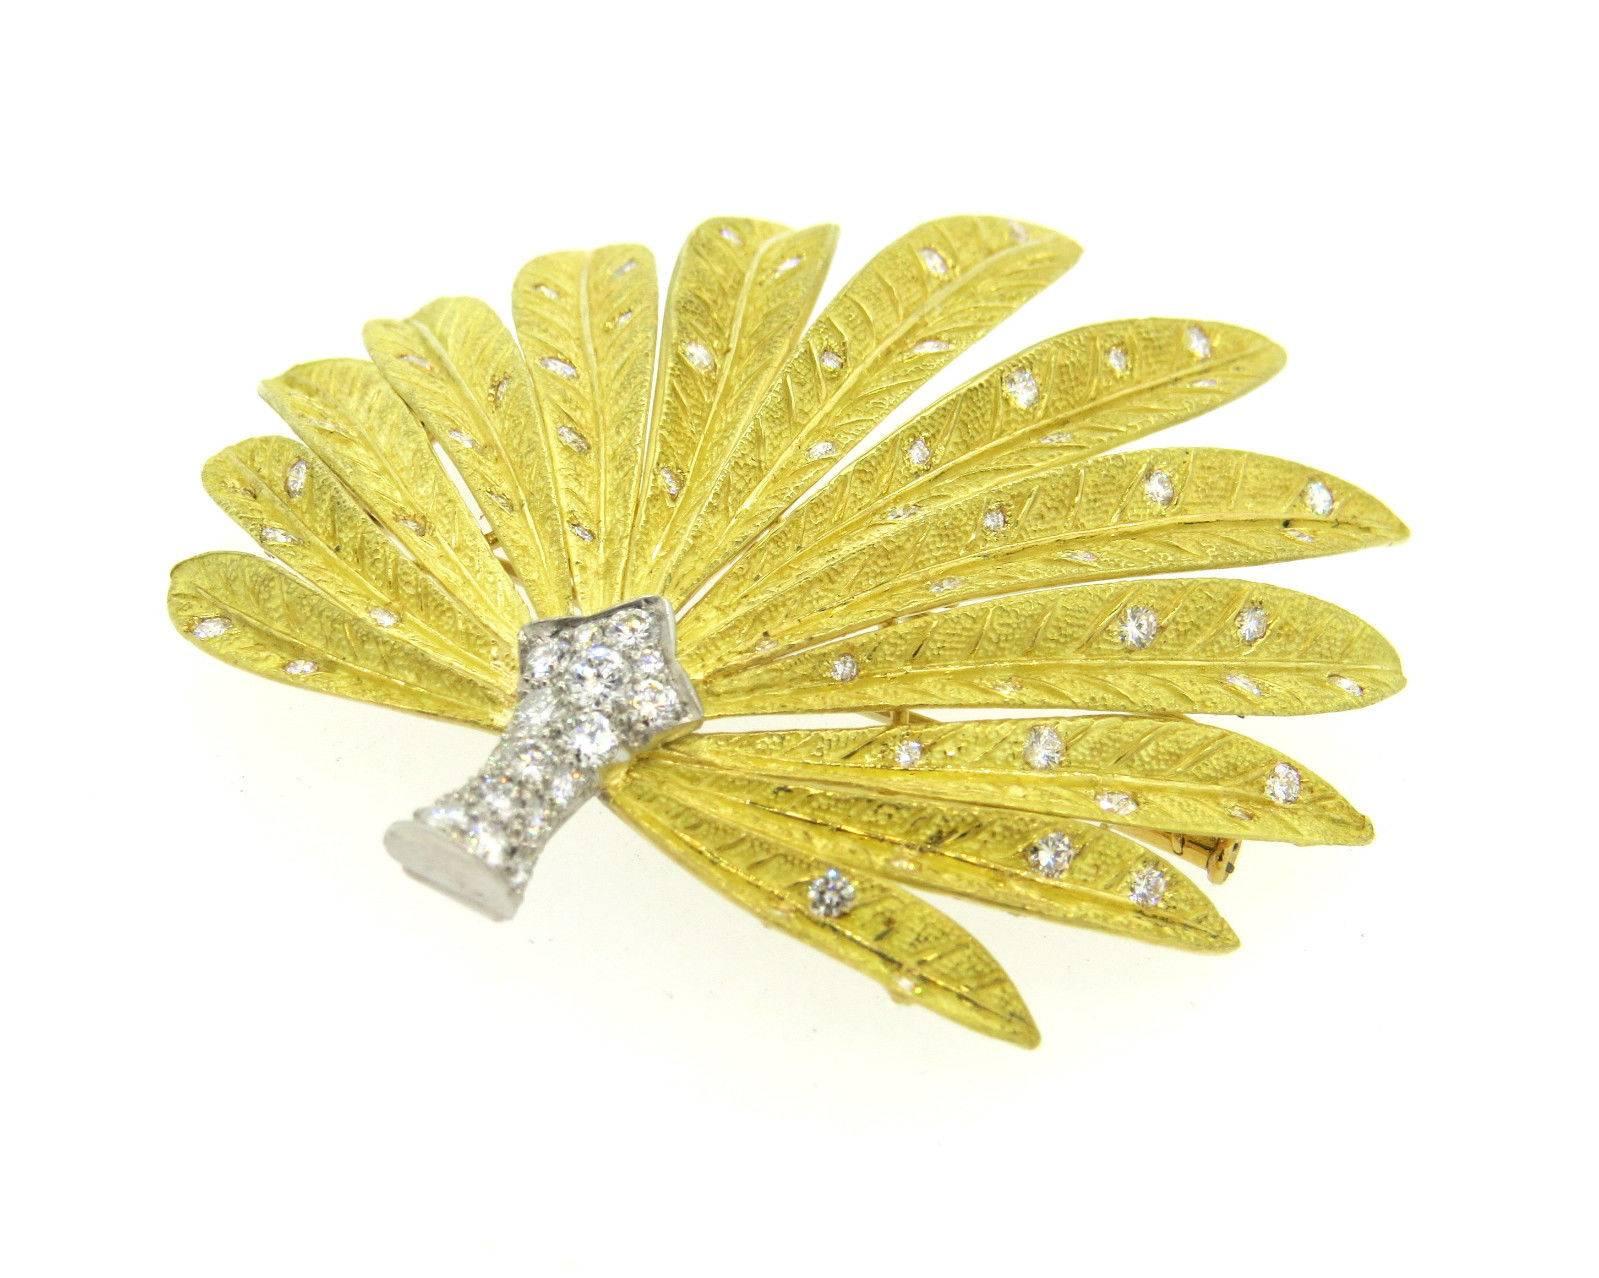 An 18k yellow gold and platinum flower brooch set with approx. 2.00ctw of G/VS diamonds. The brooch measures 64mm x 62mm and weighs 40.1 grams.